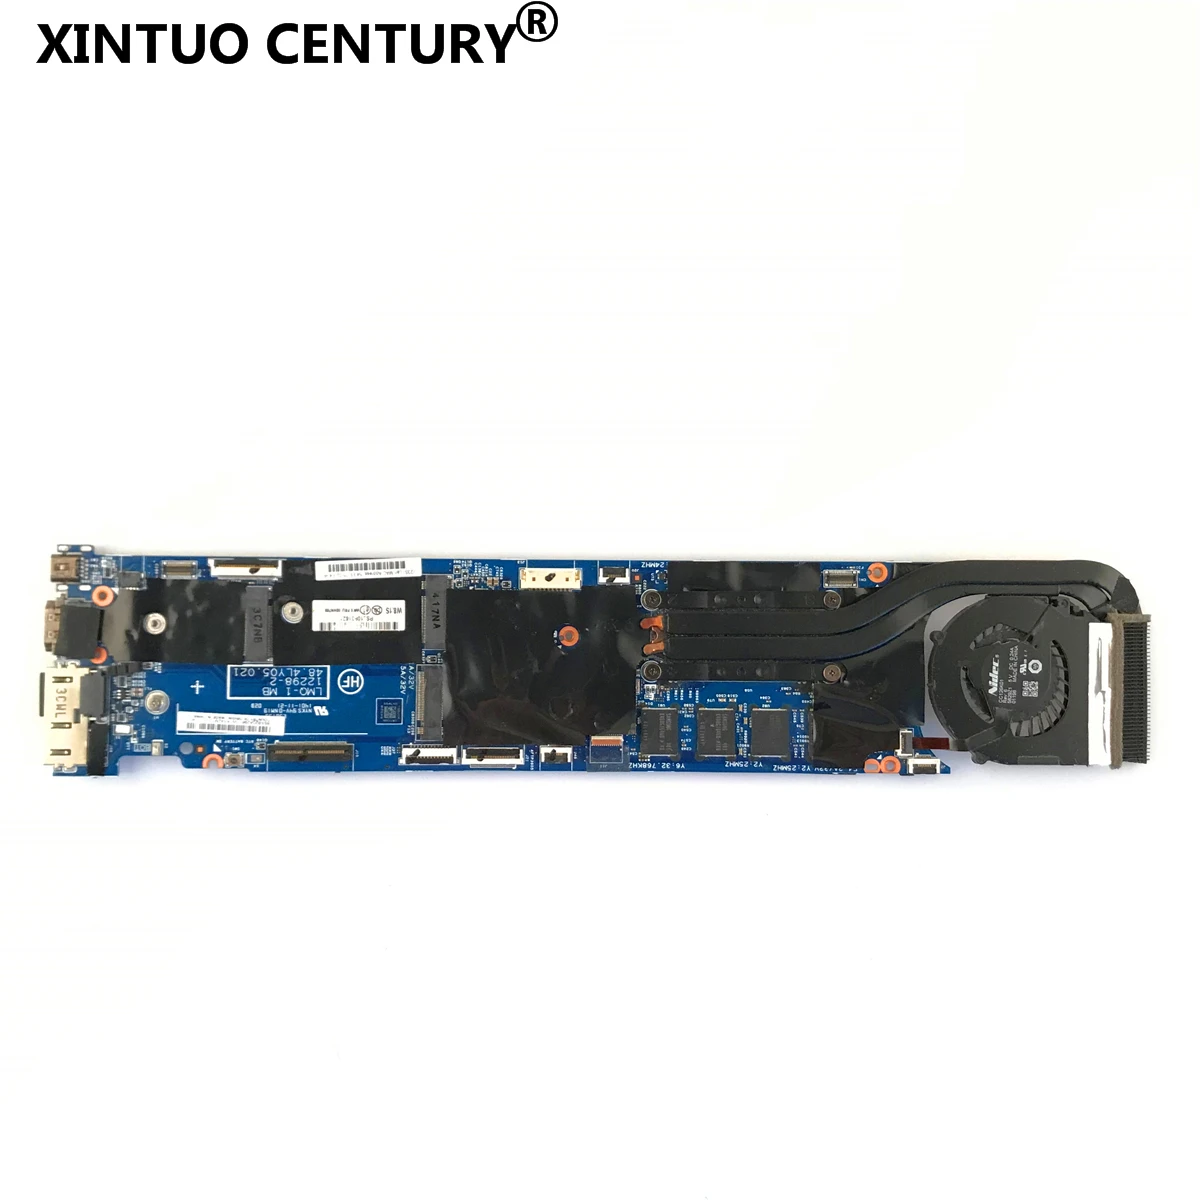 

00HN911 mainboard i5-4210 TPM for lenovo ThinkPad X1C X1 carbon motherboard LMQ-1 MB 12298-2 48.4LY26.021 Test 100% work